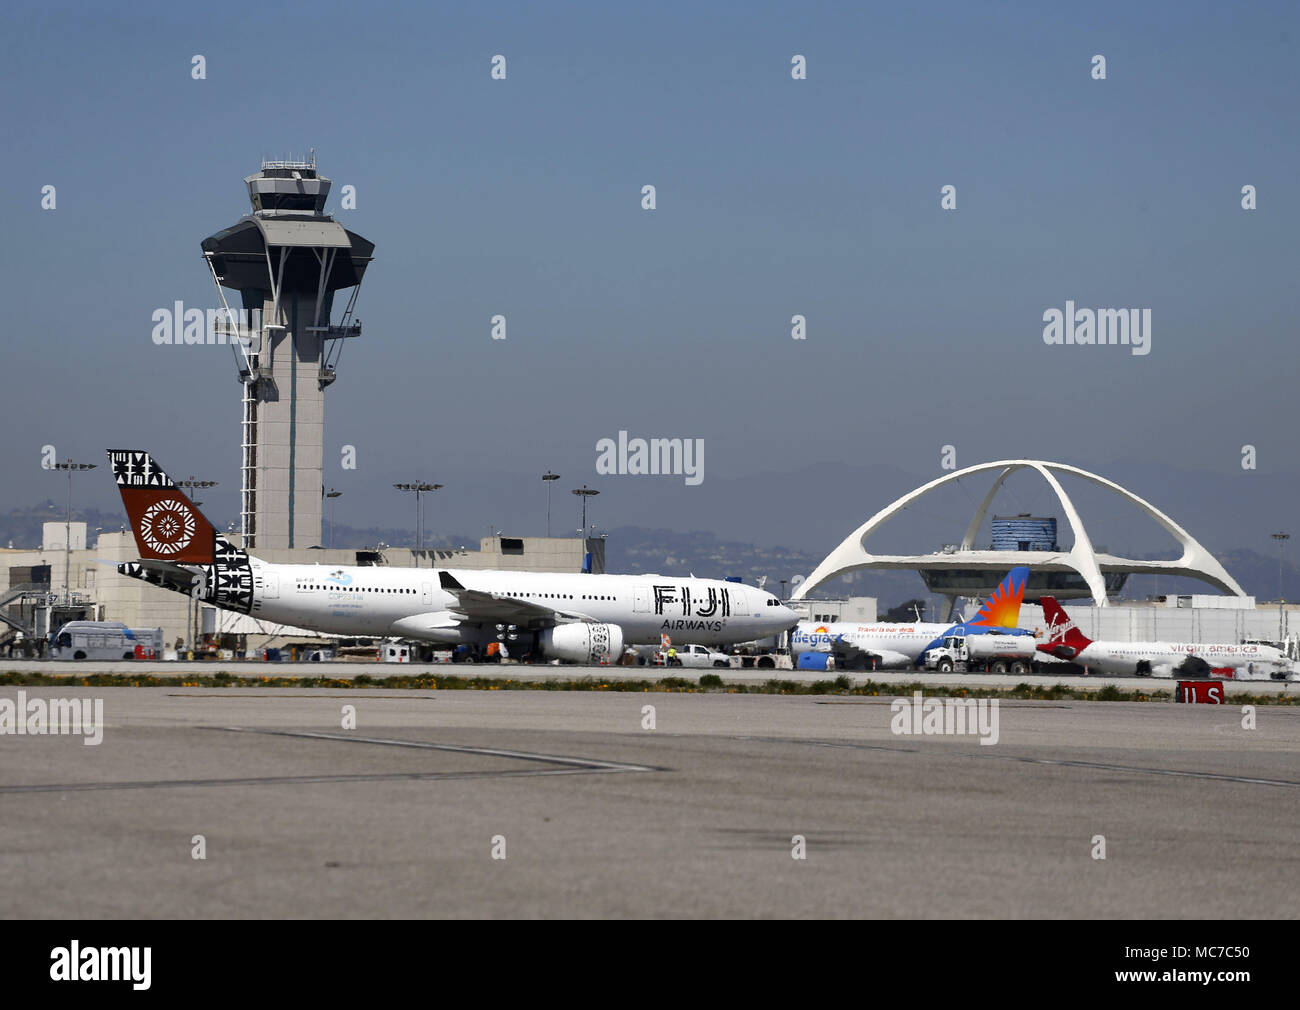 March 28, 2018 - Los Angeles, U.S - A Fiji Airlines aircraft arrives at Los Angeles International Airport (LAX) in Los Angeles Wednesday, March 28, 2018. (Credit Image: © Ringo Chiu via ZUMA Wire) Stock Photo